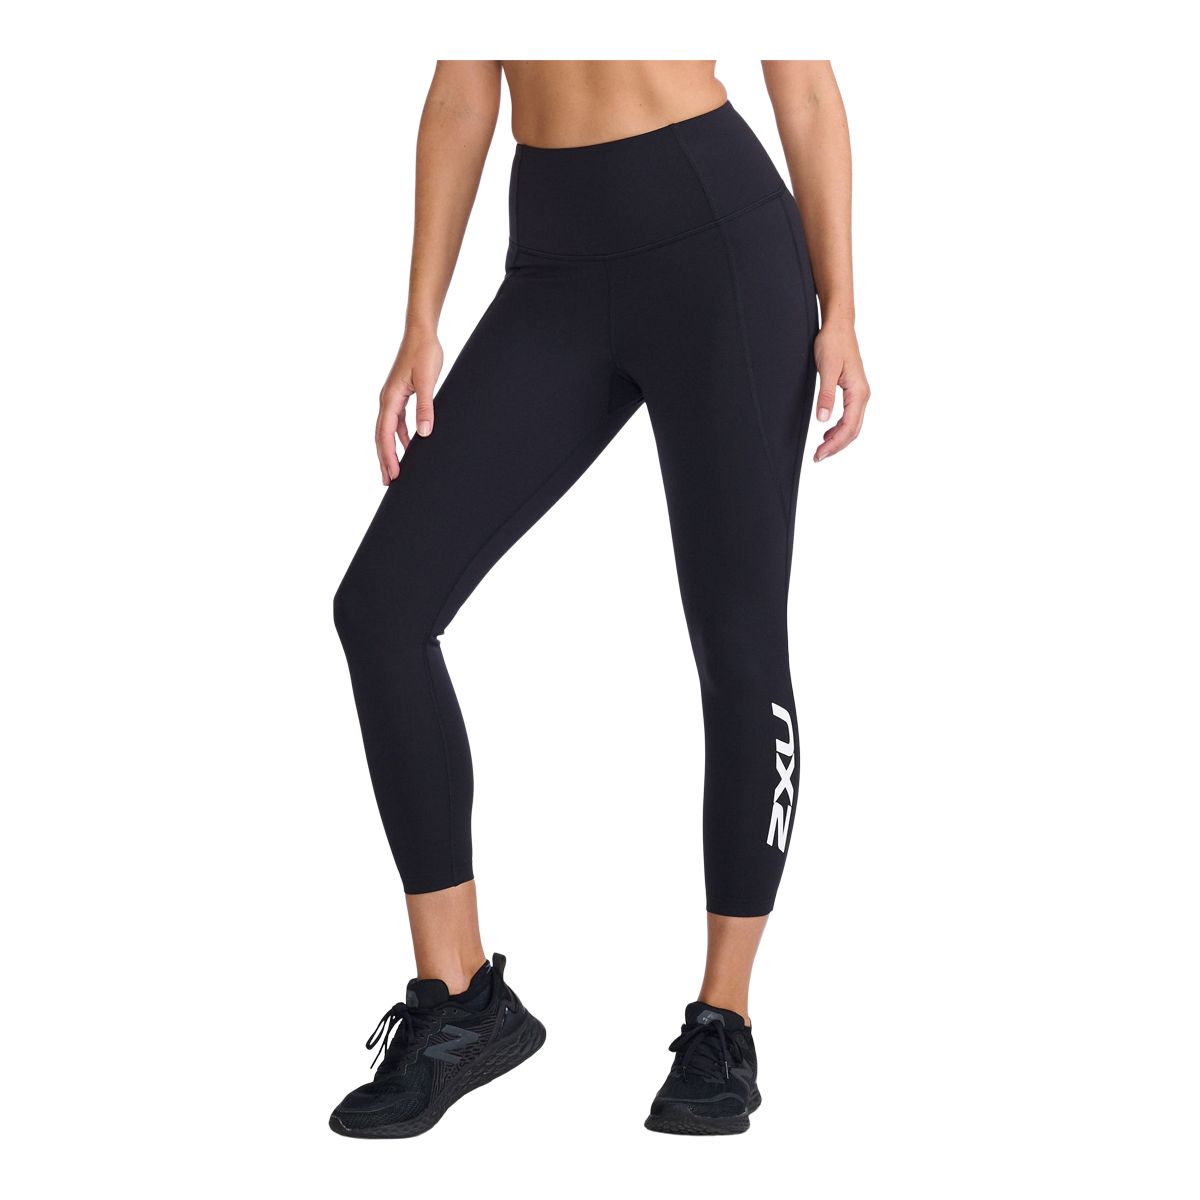 2xu, Pants & Jumpsuits, 2xu Womens Elite Power Recovery Compression Tights